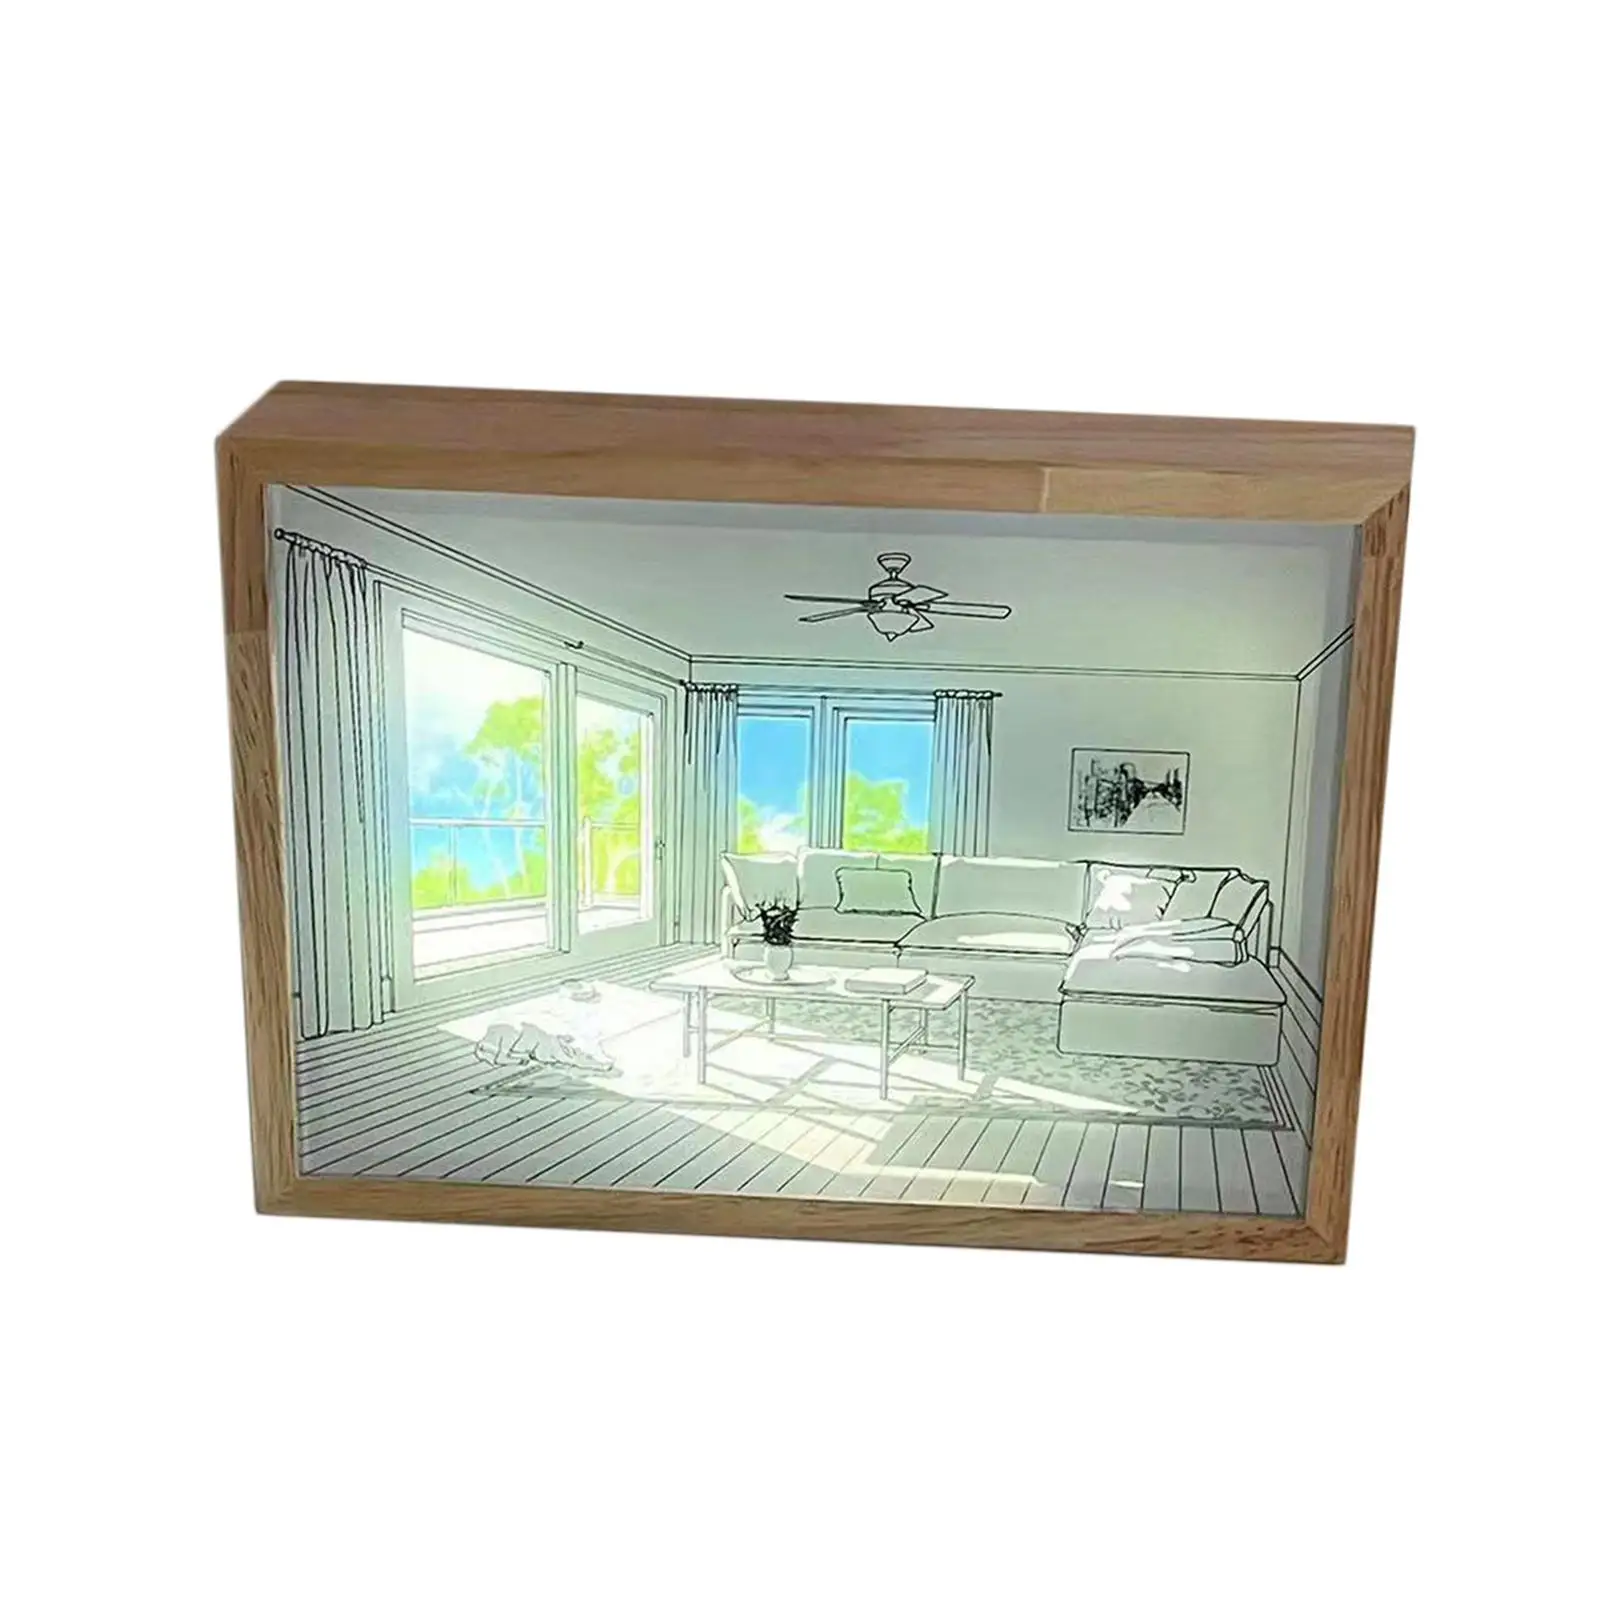 LED glowing photo frame illuminate your space with lighting, paintings, shadow